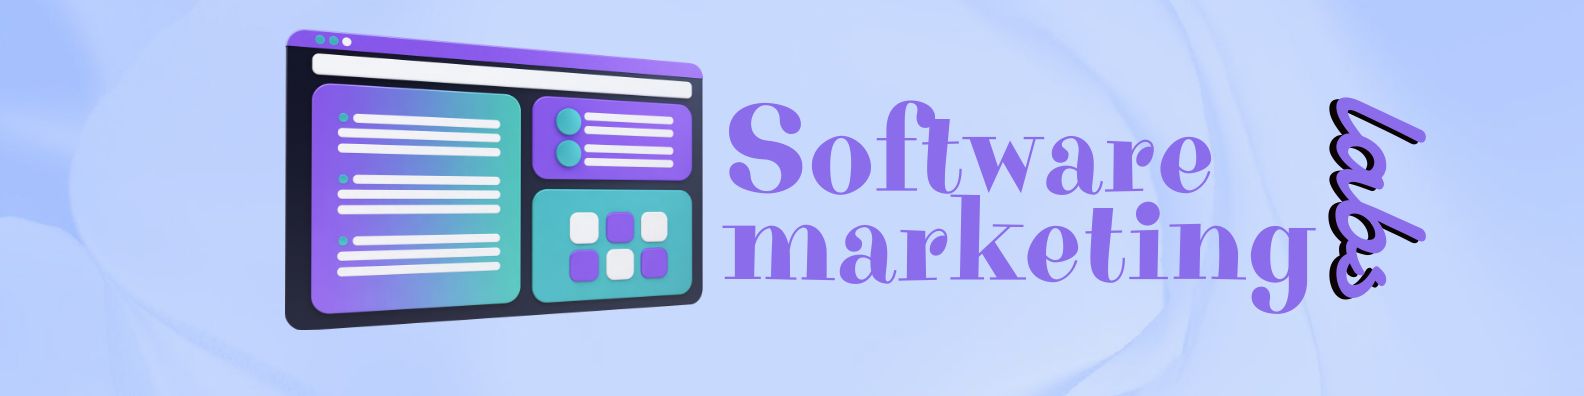 text software marketing labs 